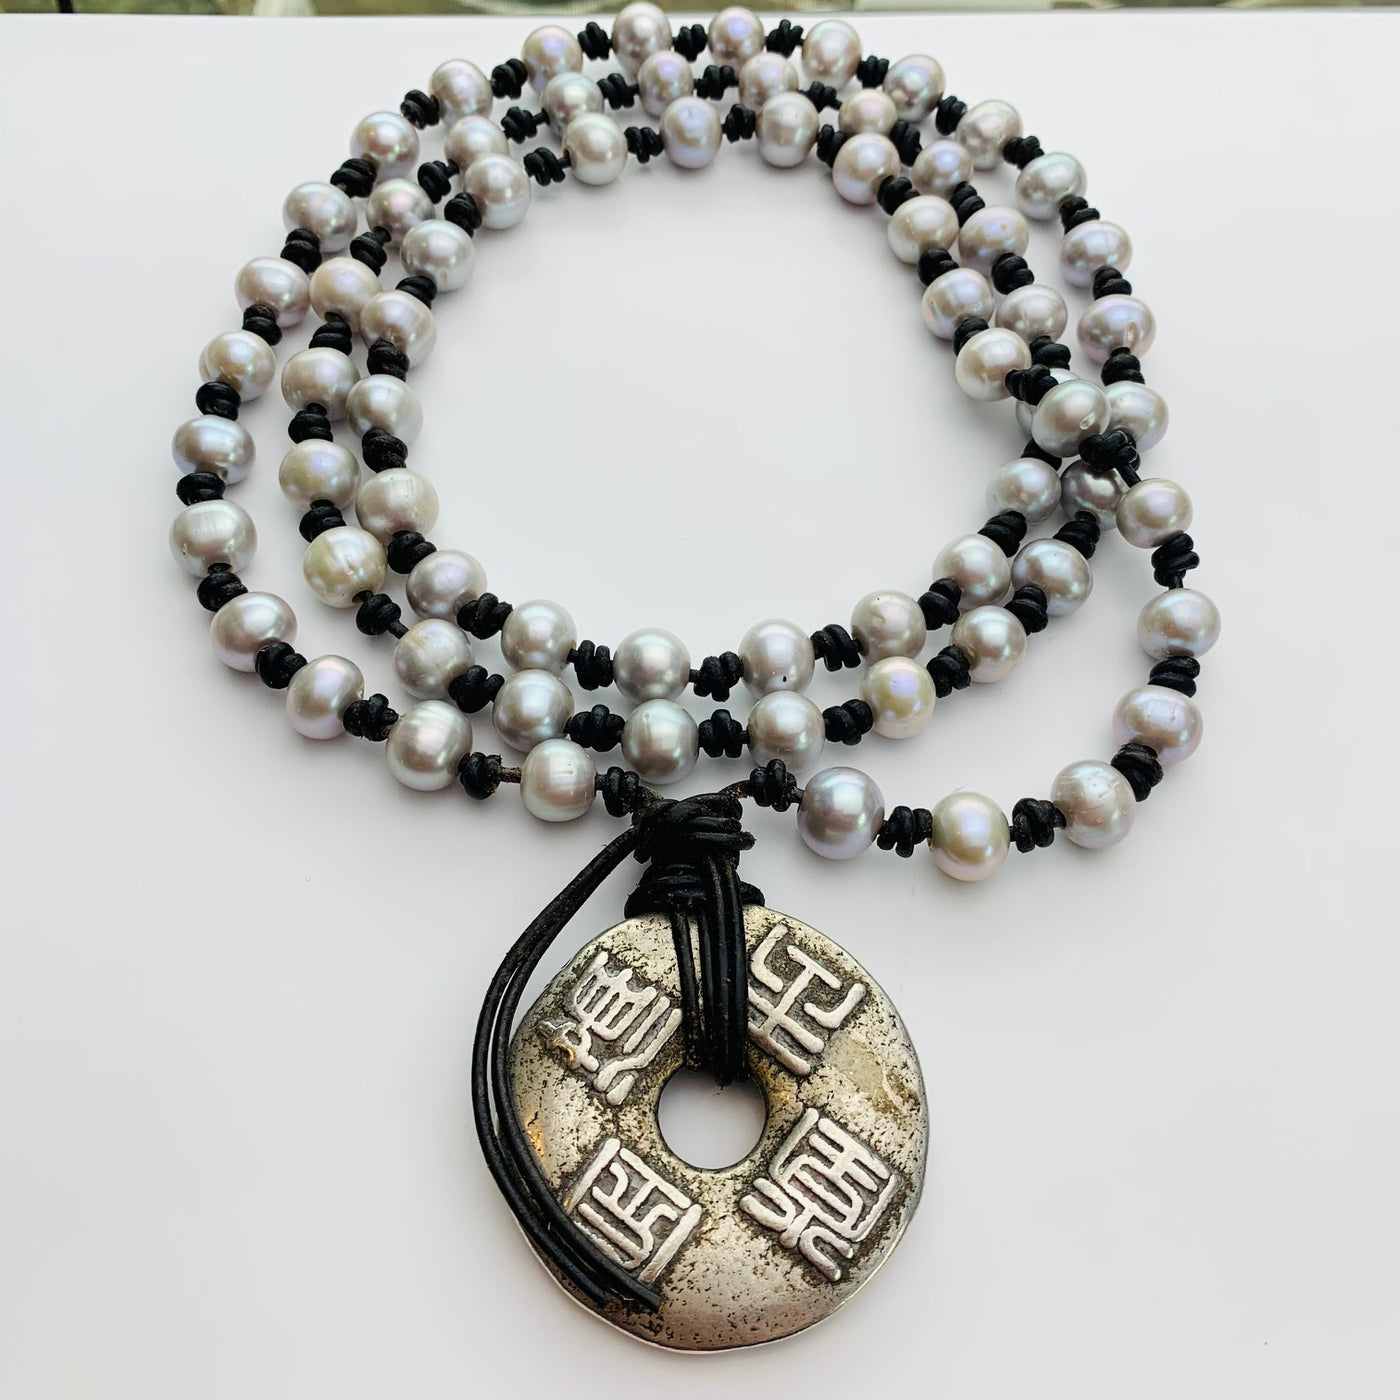 Rustic Silver Pearl & Leather Long Knotted Necklace $210.00 – EOS Designs  Studio